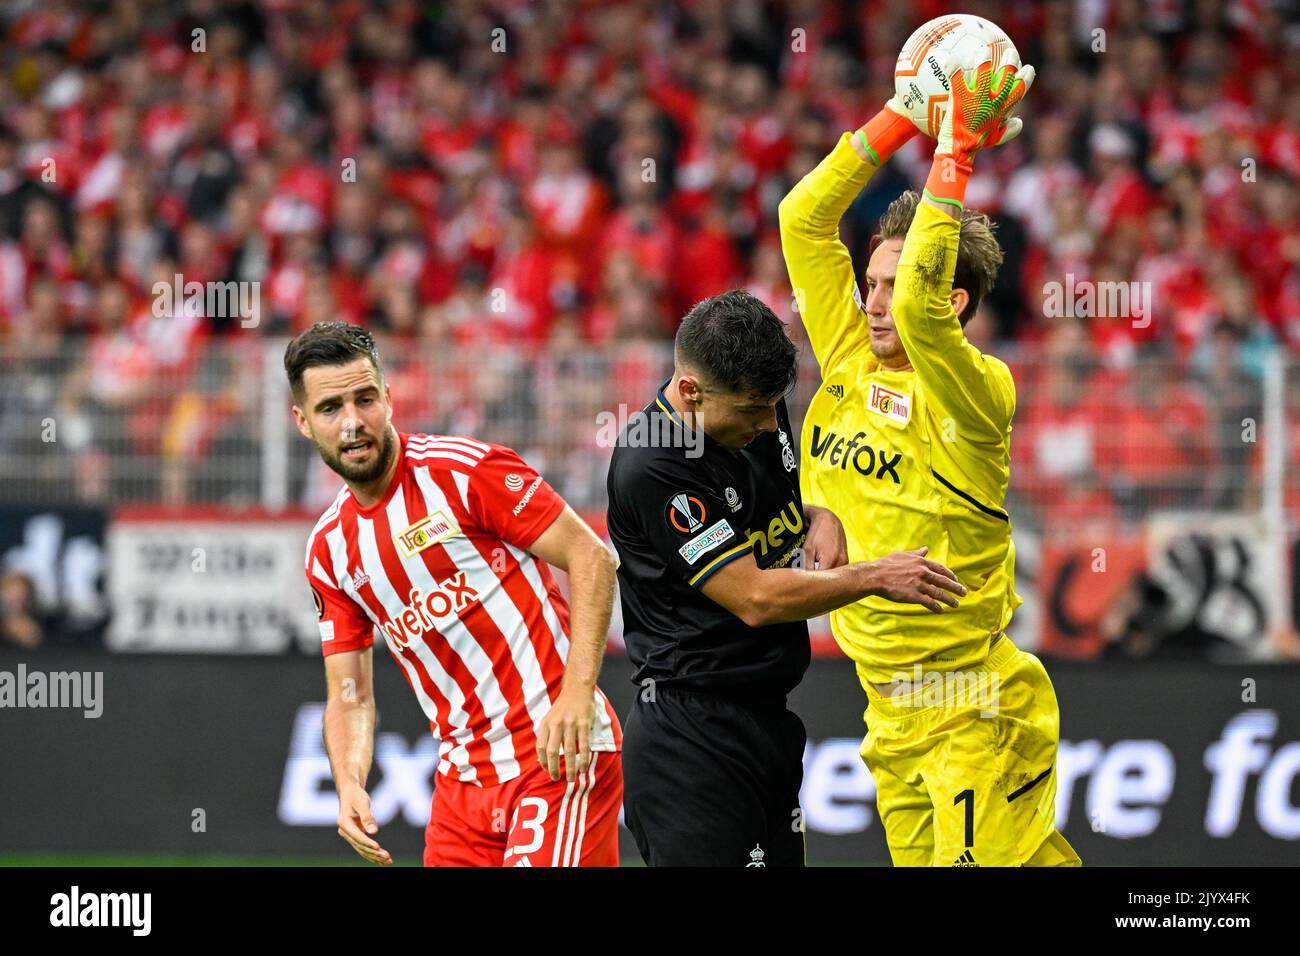 Union's Dante Vanzeir and Berlin's goalkeeper Frederik Ronnow fight for the ball during a match between FC Union Berlin and Belgian soccer team Royale Union Saint-Gilloise, Thursday 08 September 2022 in Berlin, the first game out of six in the group stage of the UEFA Europa League competition. BELGA PHOTO LAURIE DIEFFEMBACQ Stock Photo